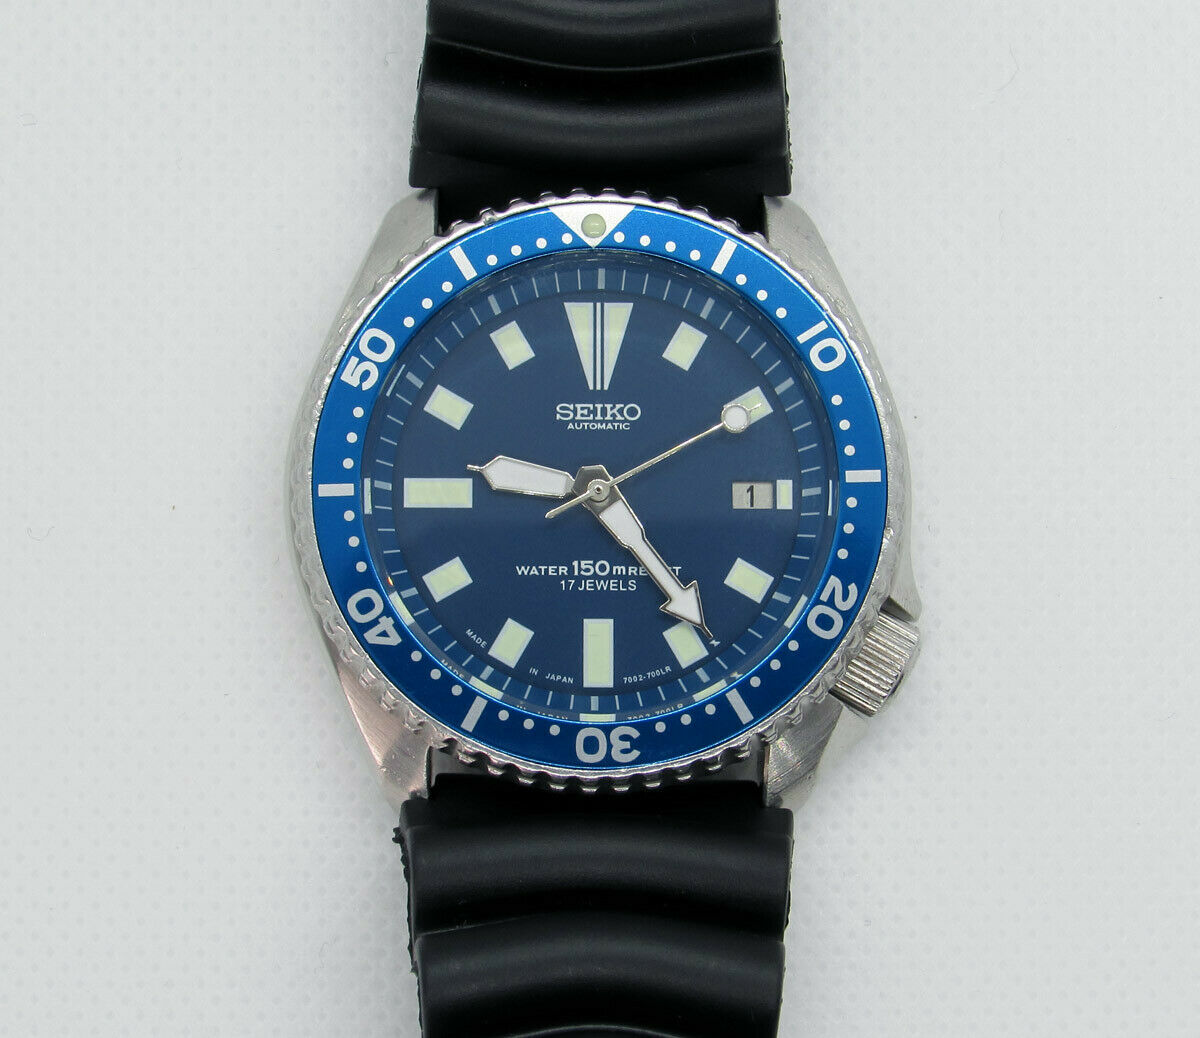 Seiko 7002-7000 A1 Divers Automatic Watch 150m - Blue Dial 17 Jewels |  WatchCharts